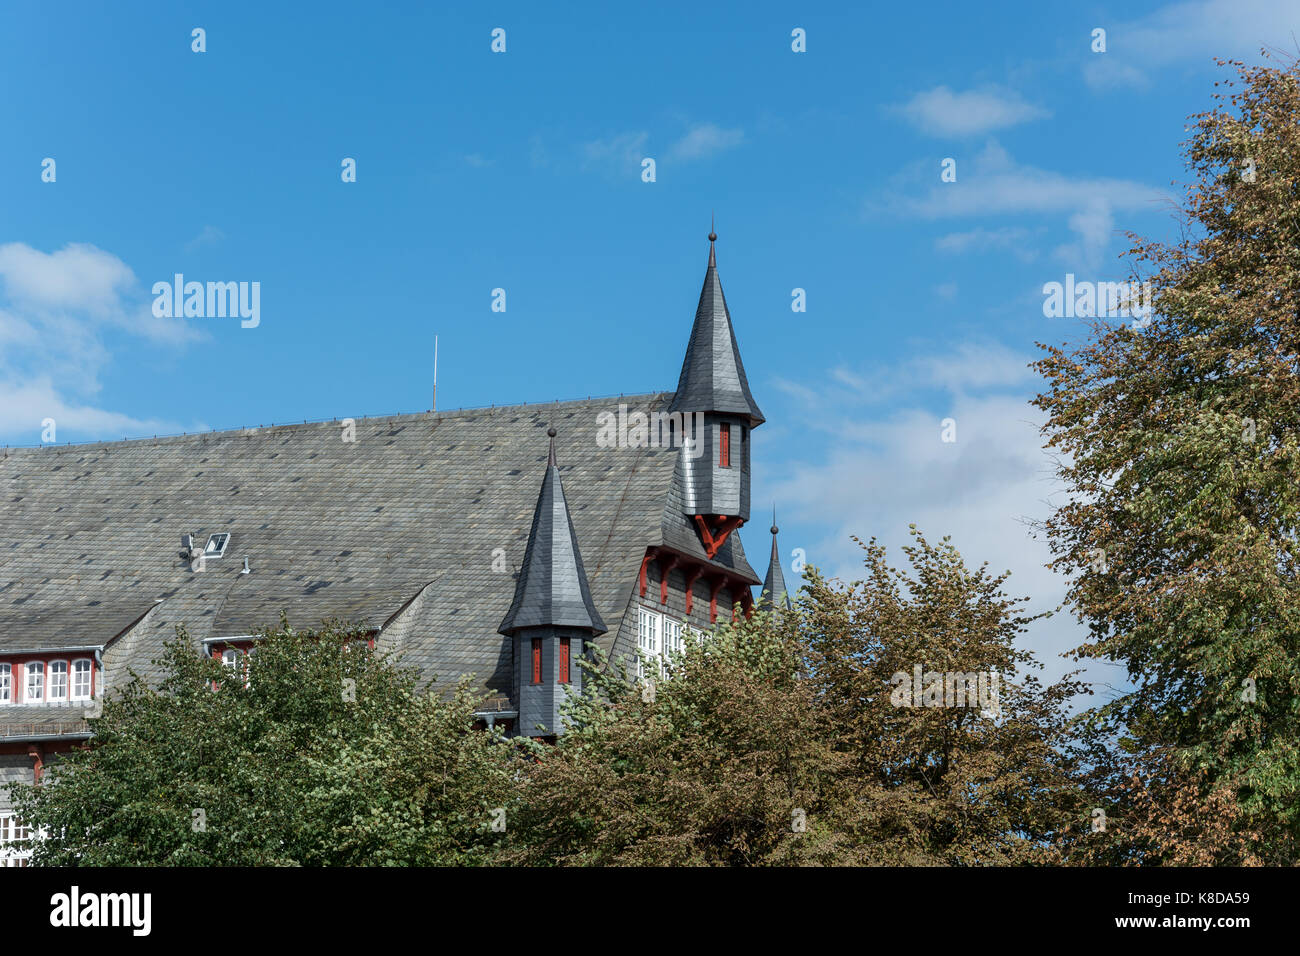 The town hall of the small German town Fritzlar with trees in the foreground Stock Photo